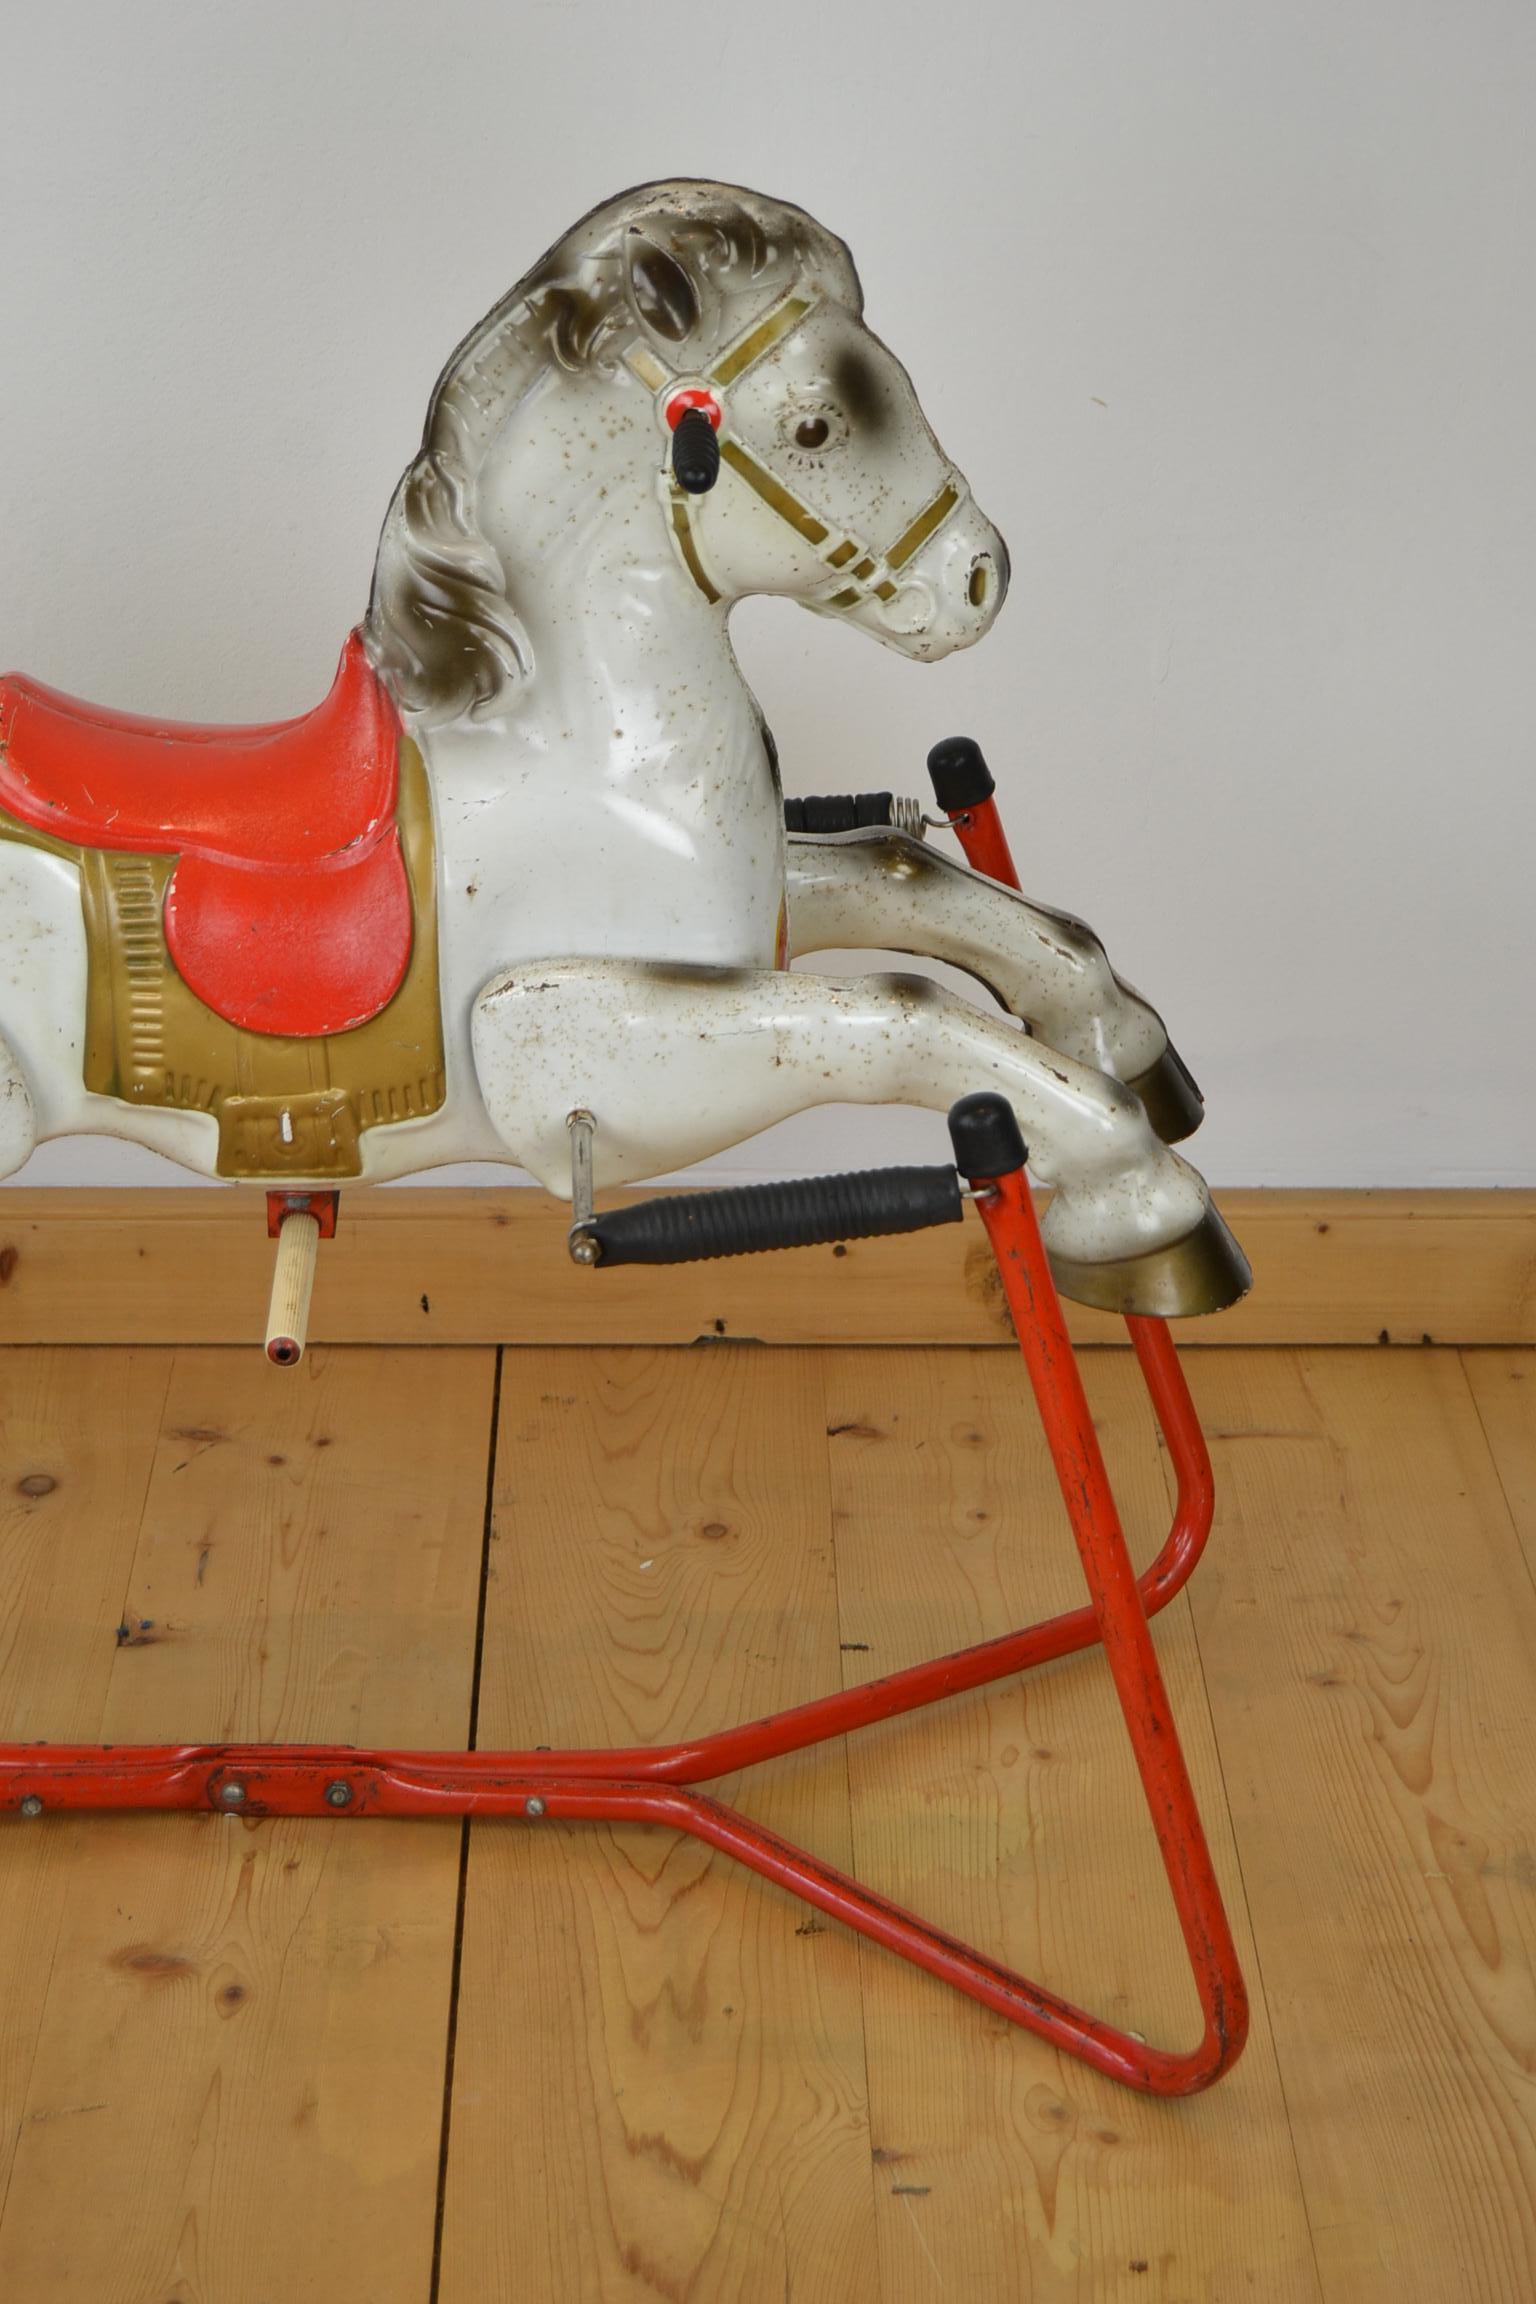 1960s Mobo Prairie King Rocking Horse Toy. This Rocking Horse was made in England by D.Sebel & Co LTD Mobo Toys. This metal horse toy is standing on a frame with springs to rock. With a red saddle and a gold colored saddle cloth or caparison. Made